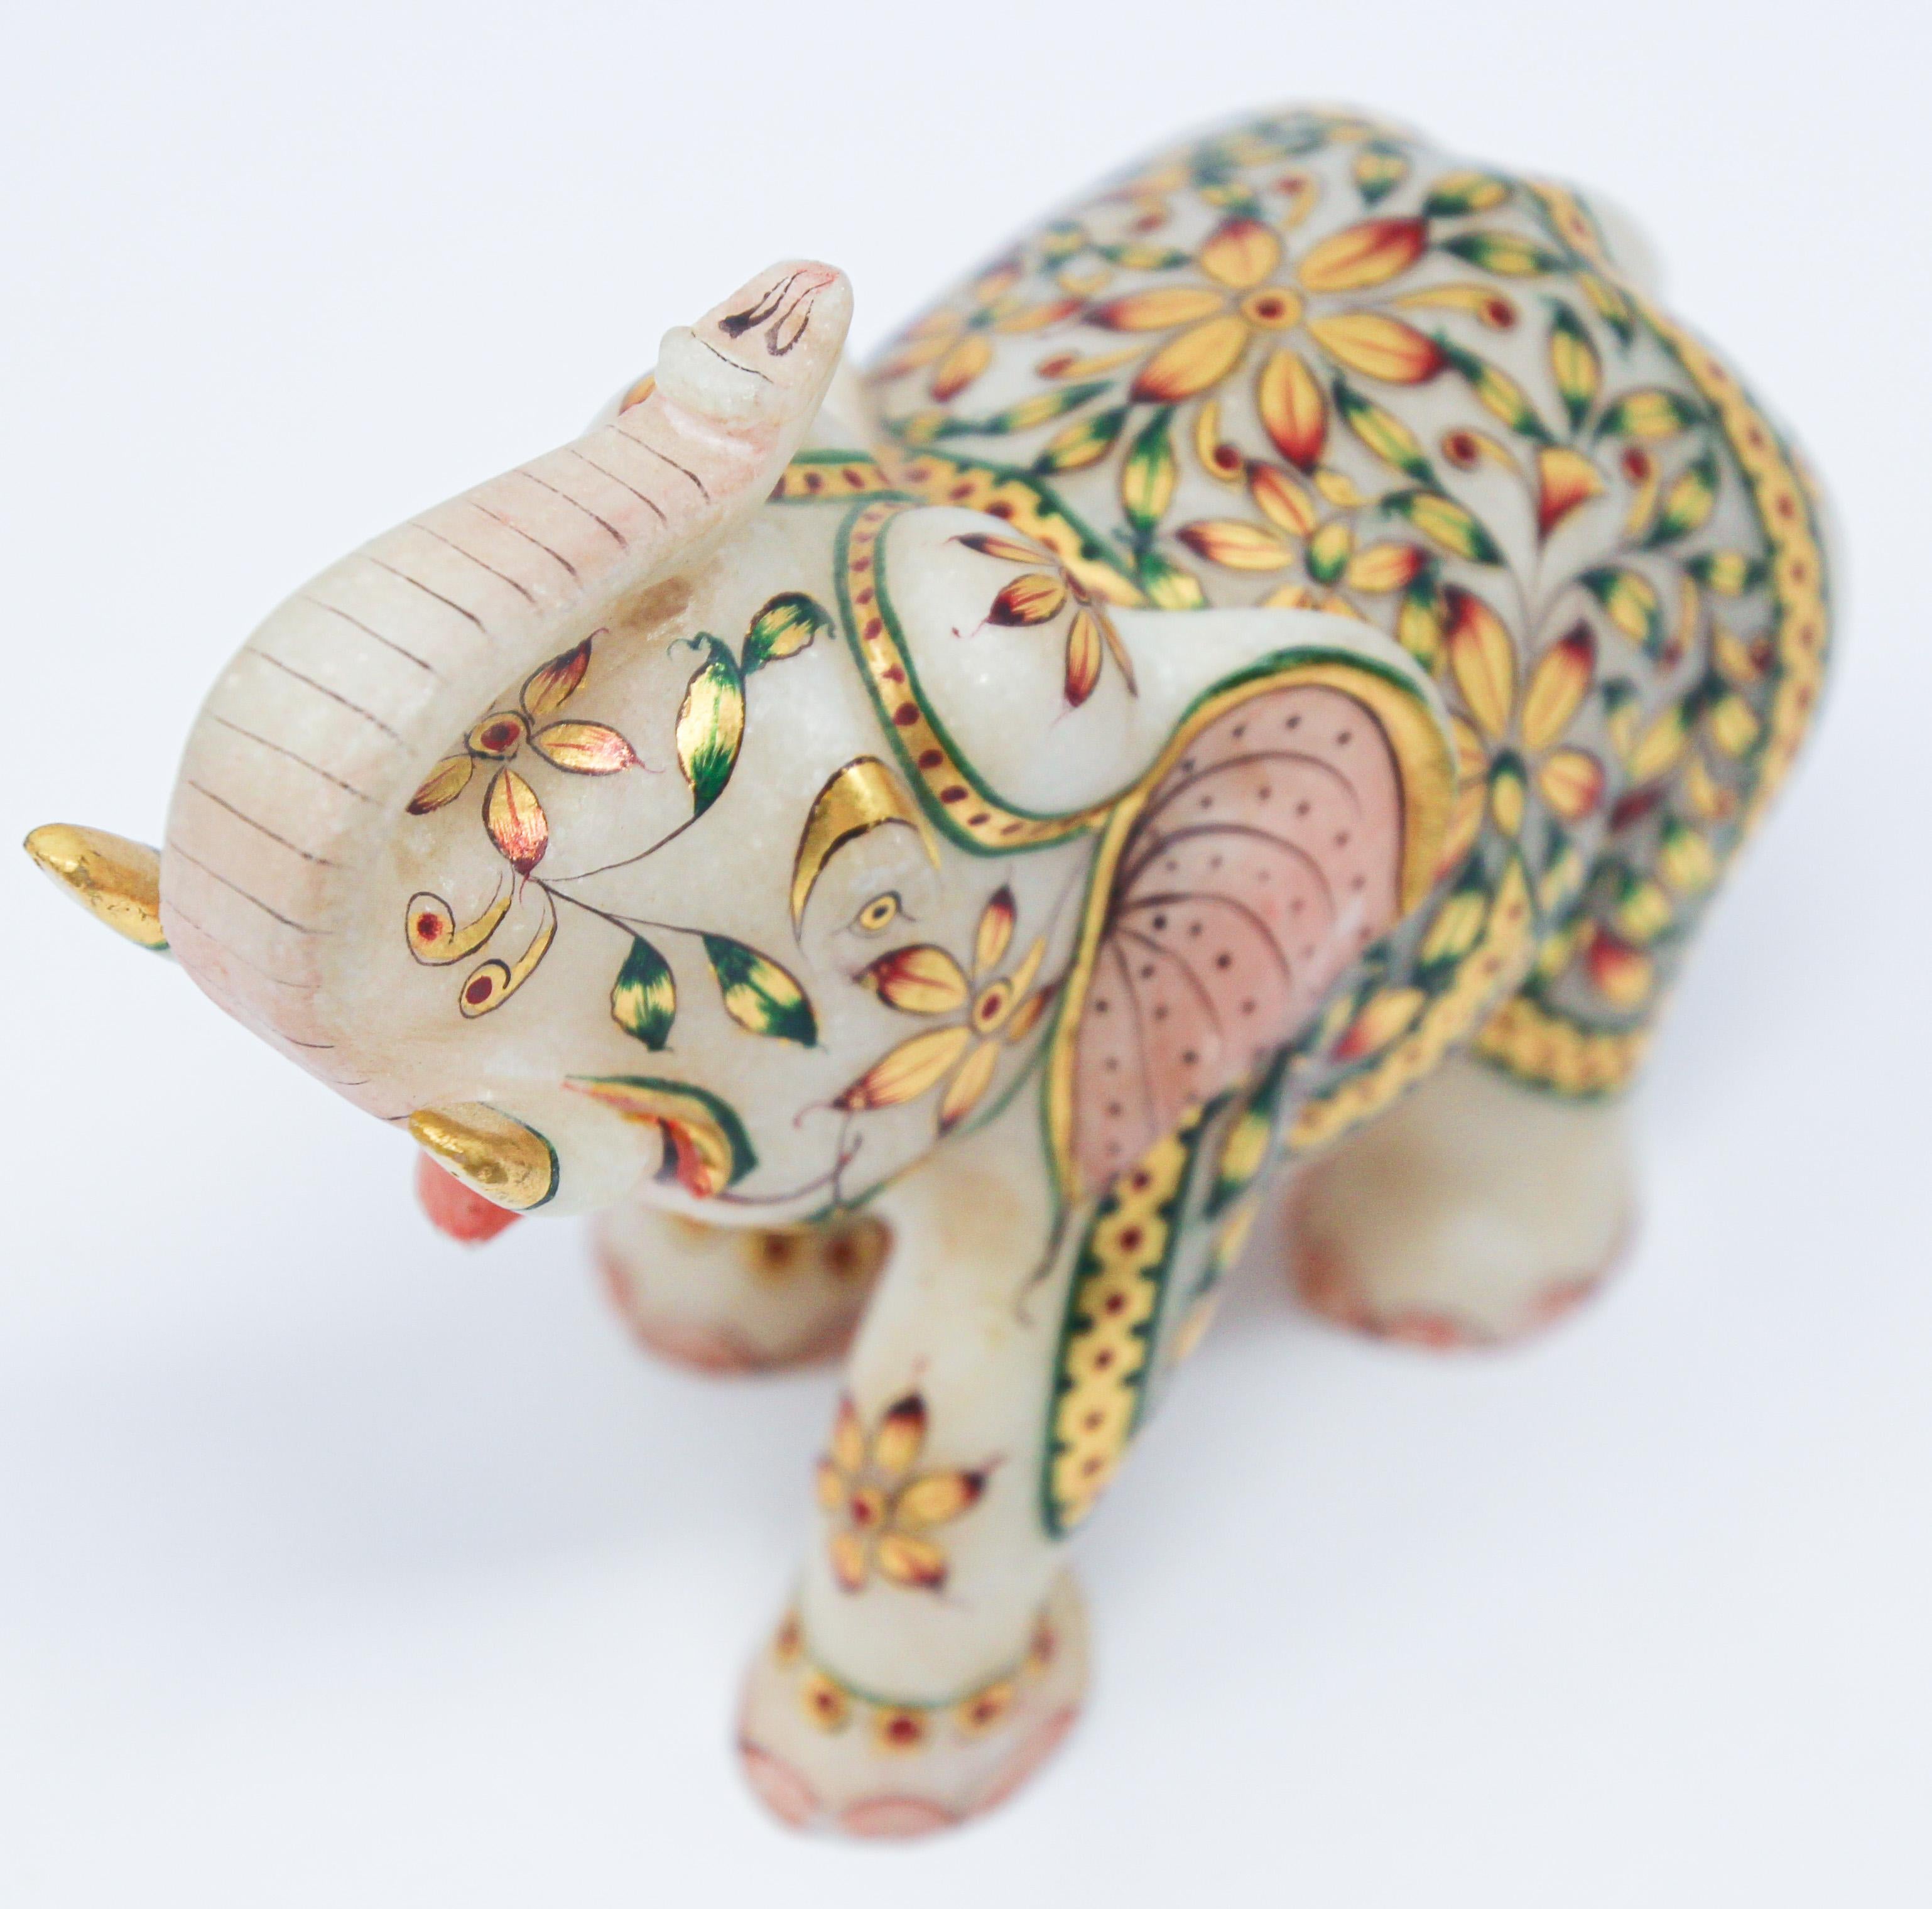 Indian Vintage White Marble Jeweled Elephant Sculpture Paper Weight